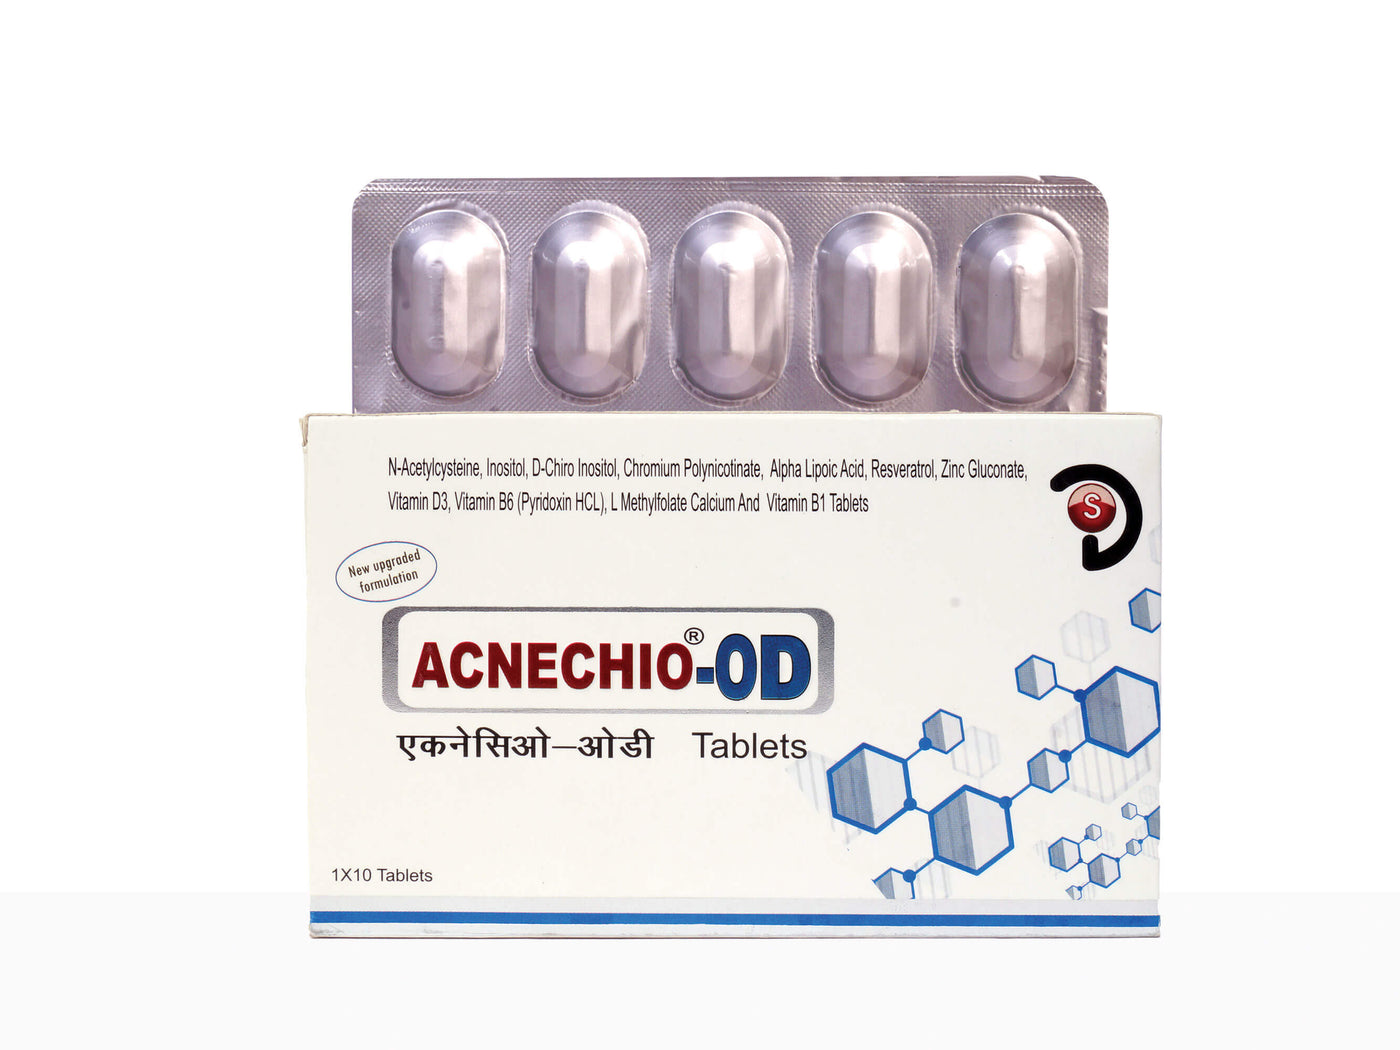 Acnechio-OD Tablets